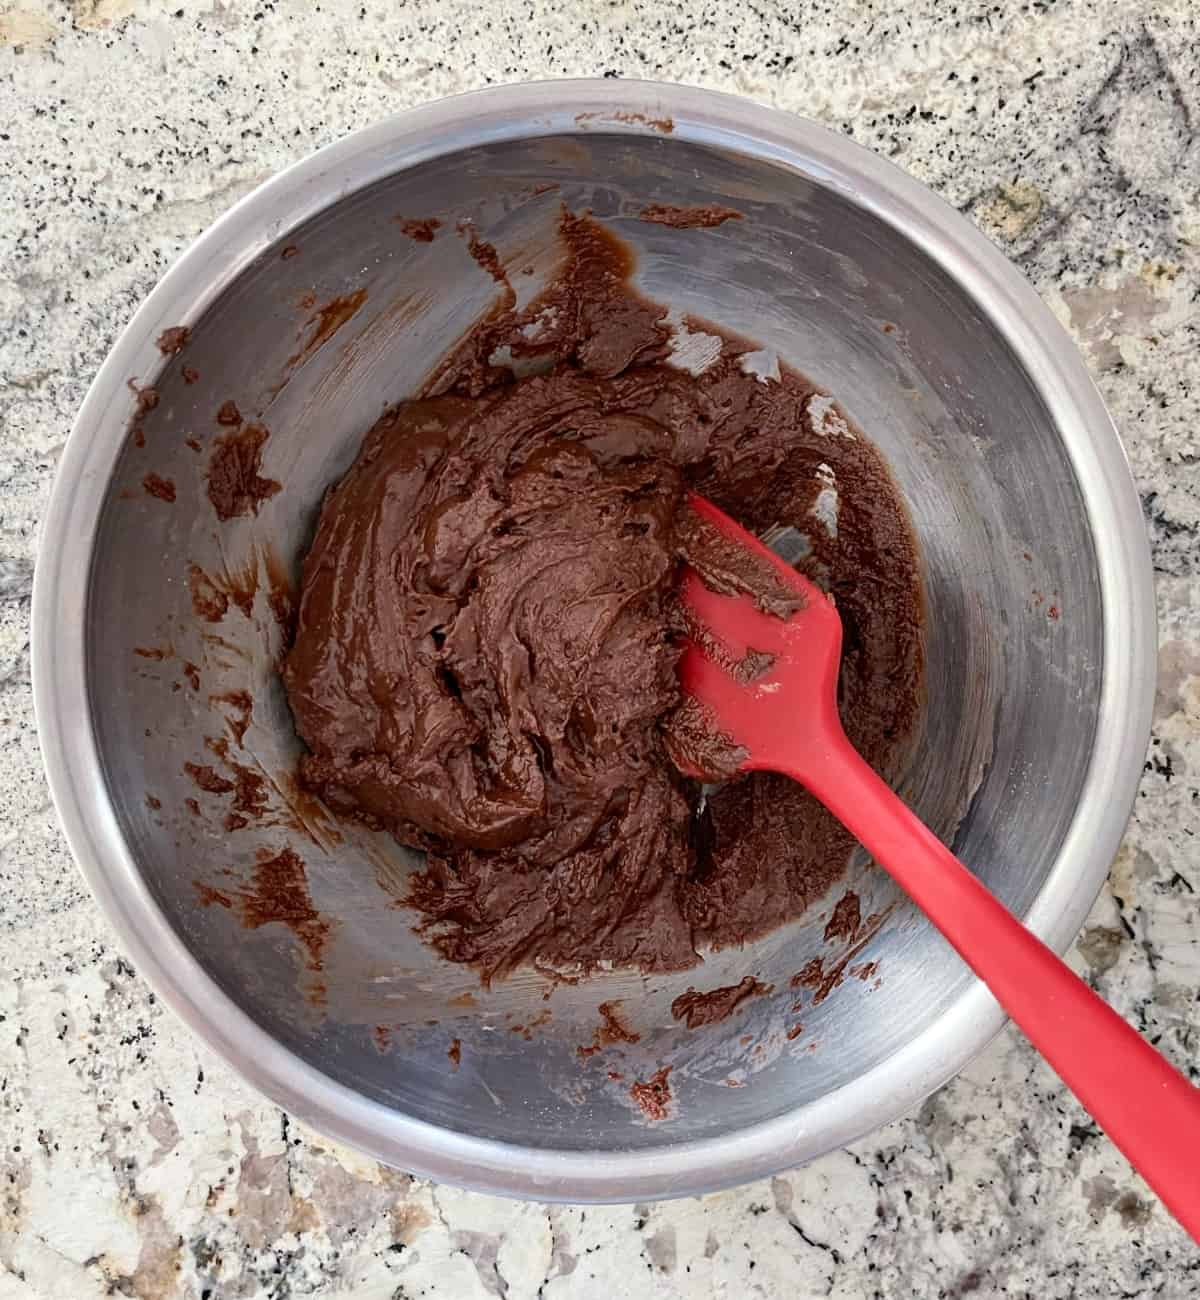 Stirring Halo Top fudge brownie mix, canola oil, water and an egg in a mixing bowl with a red spatula.